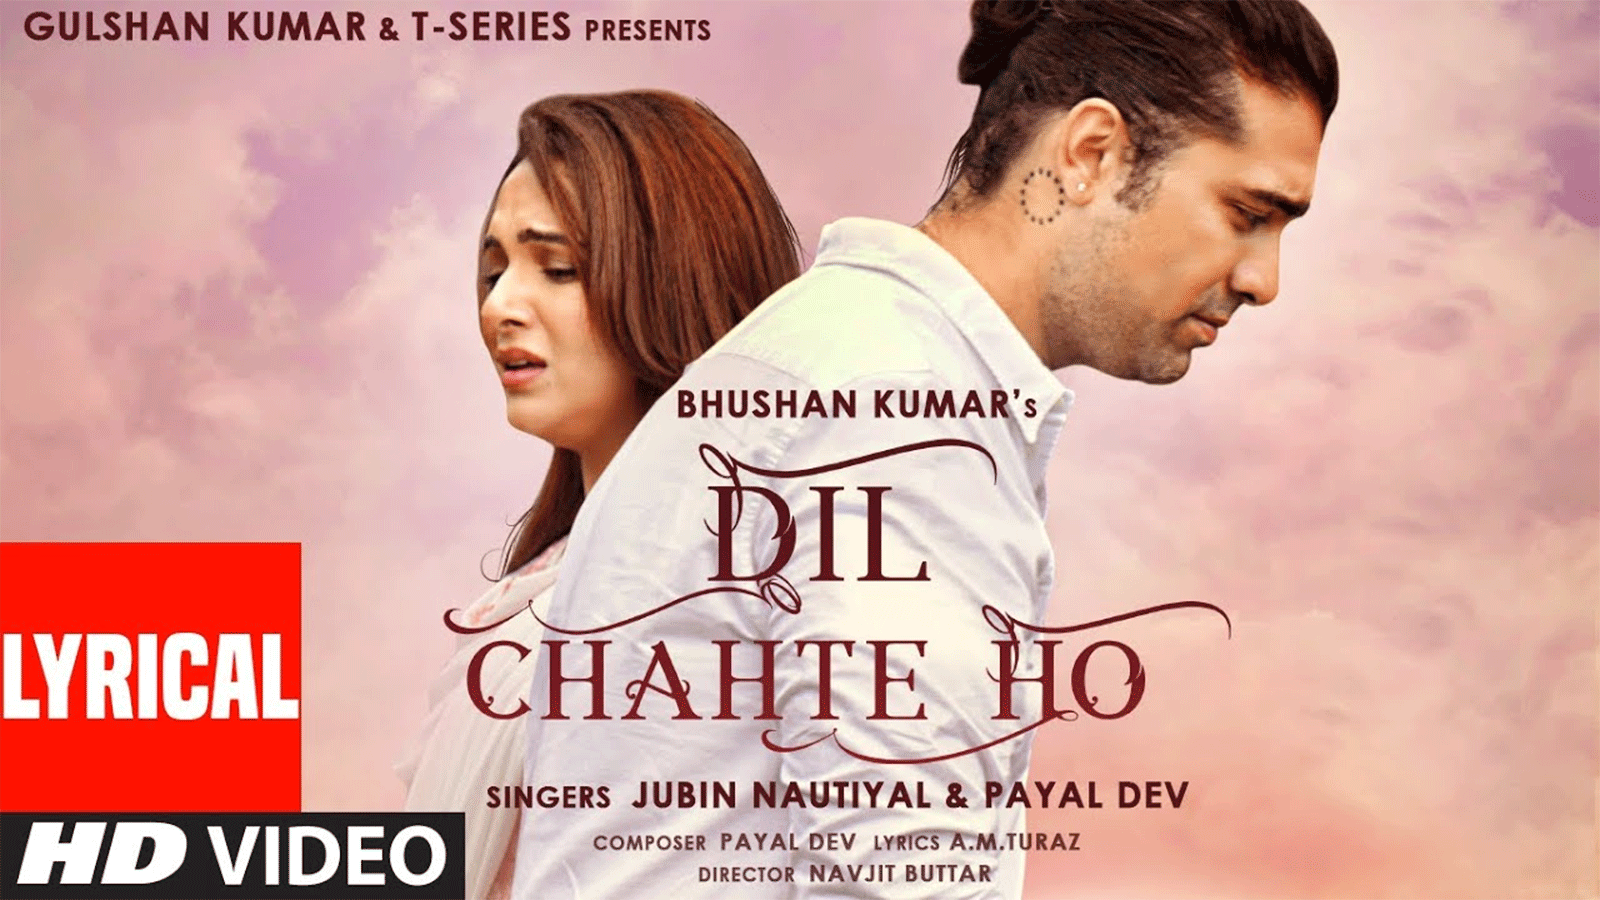 Check Out New Hindi Song Lyrical - 'Dil Chahte Ho' Sung By Jubin ...